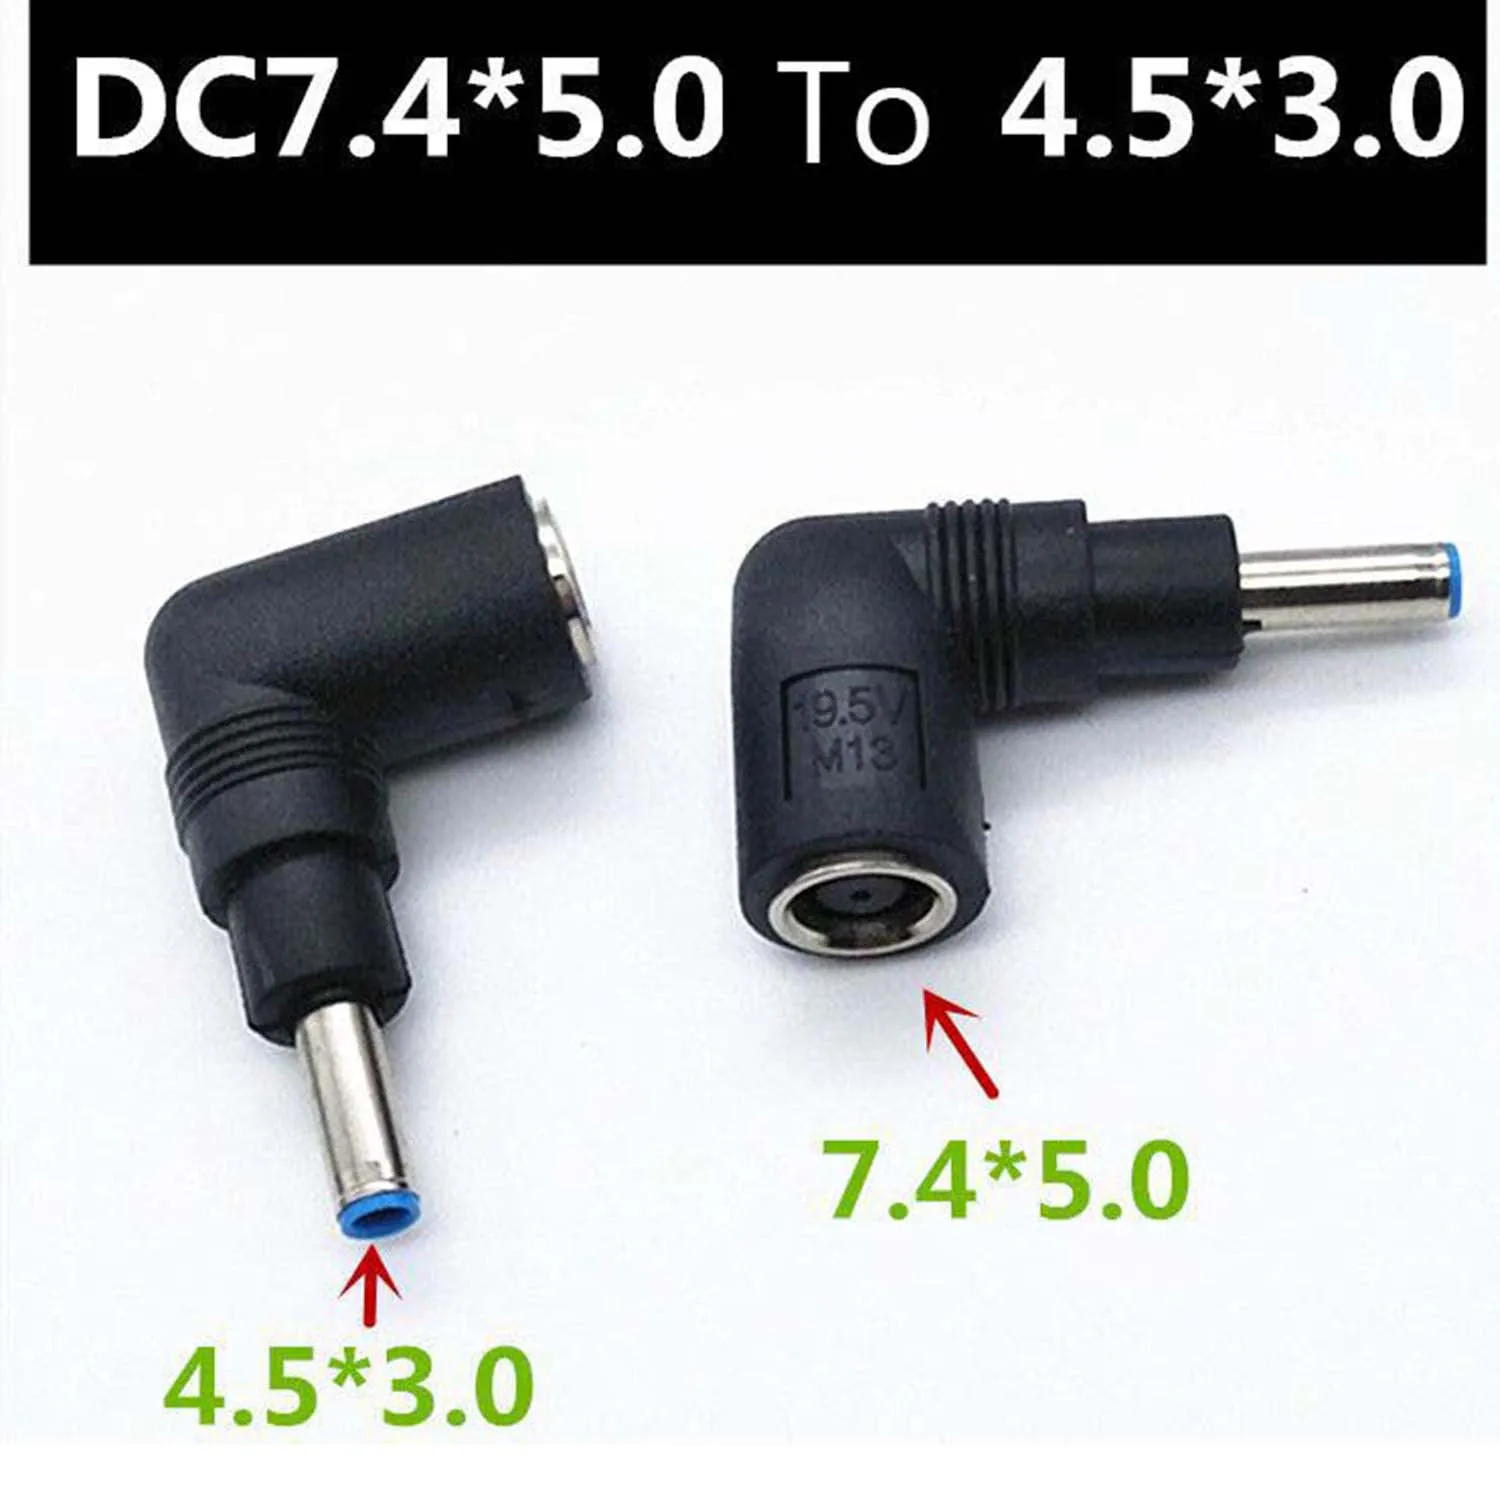 50pcs HP DC Power Cable 7.4x5.0mm Female to 4.5x3.0mm Male Central Pin Adapter 